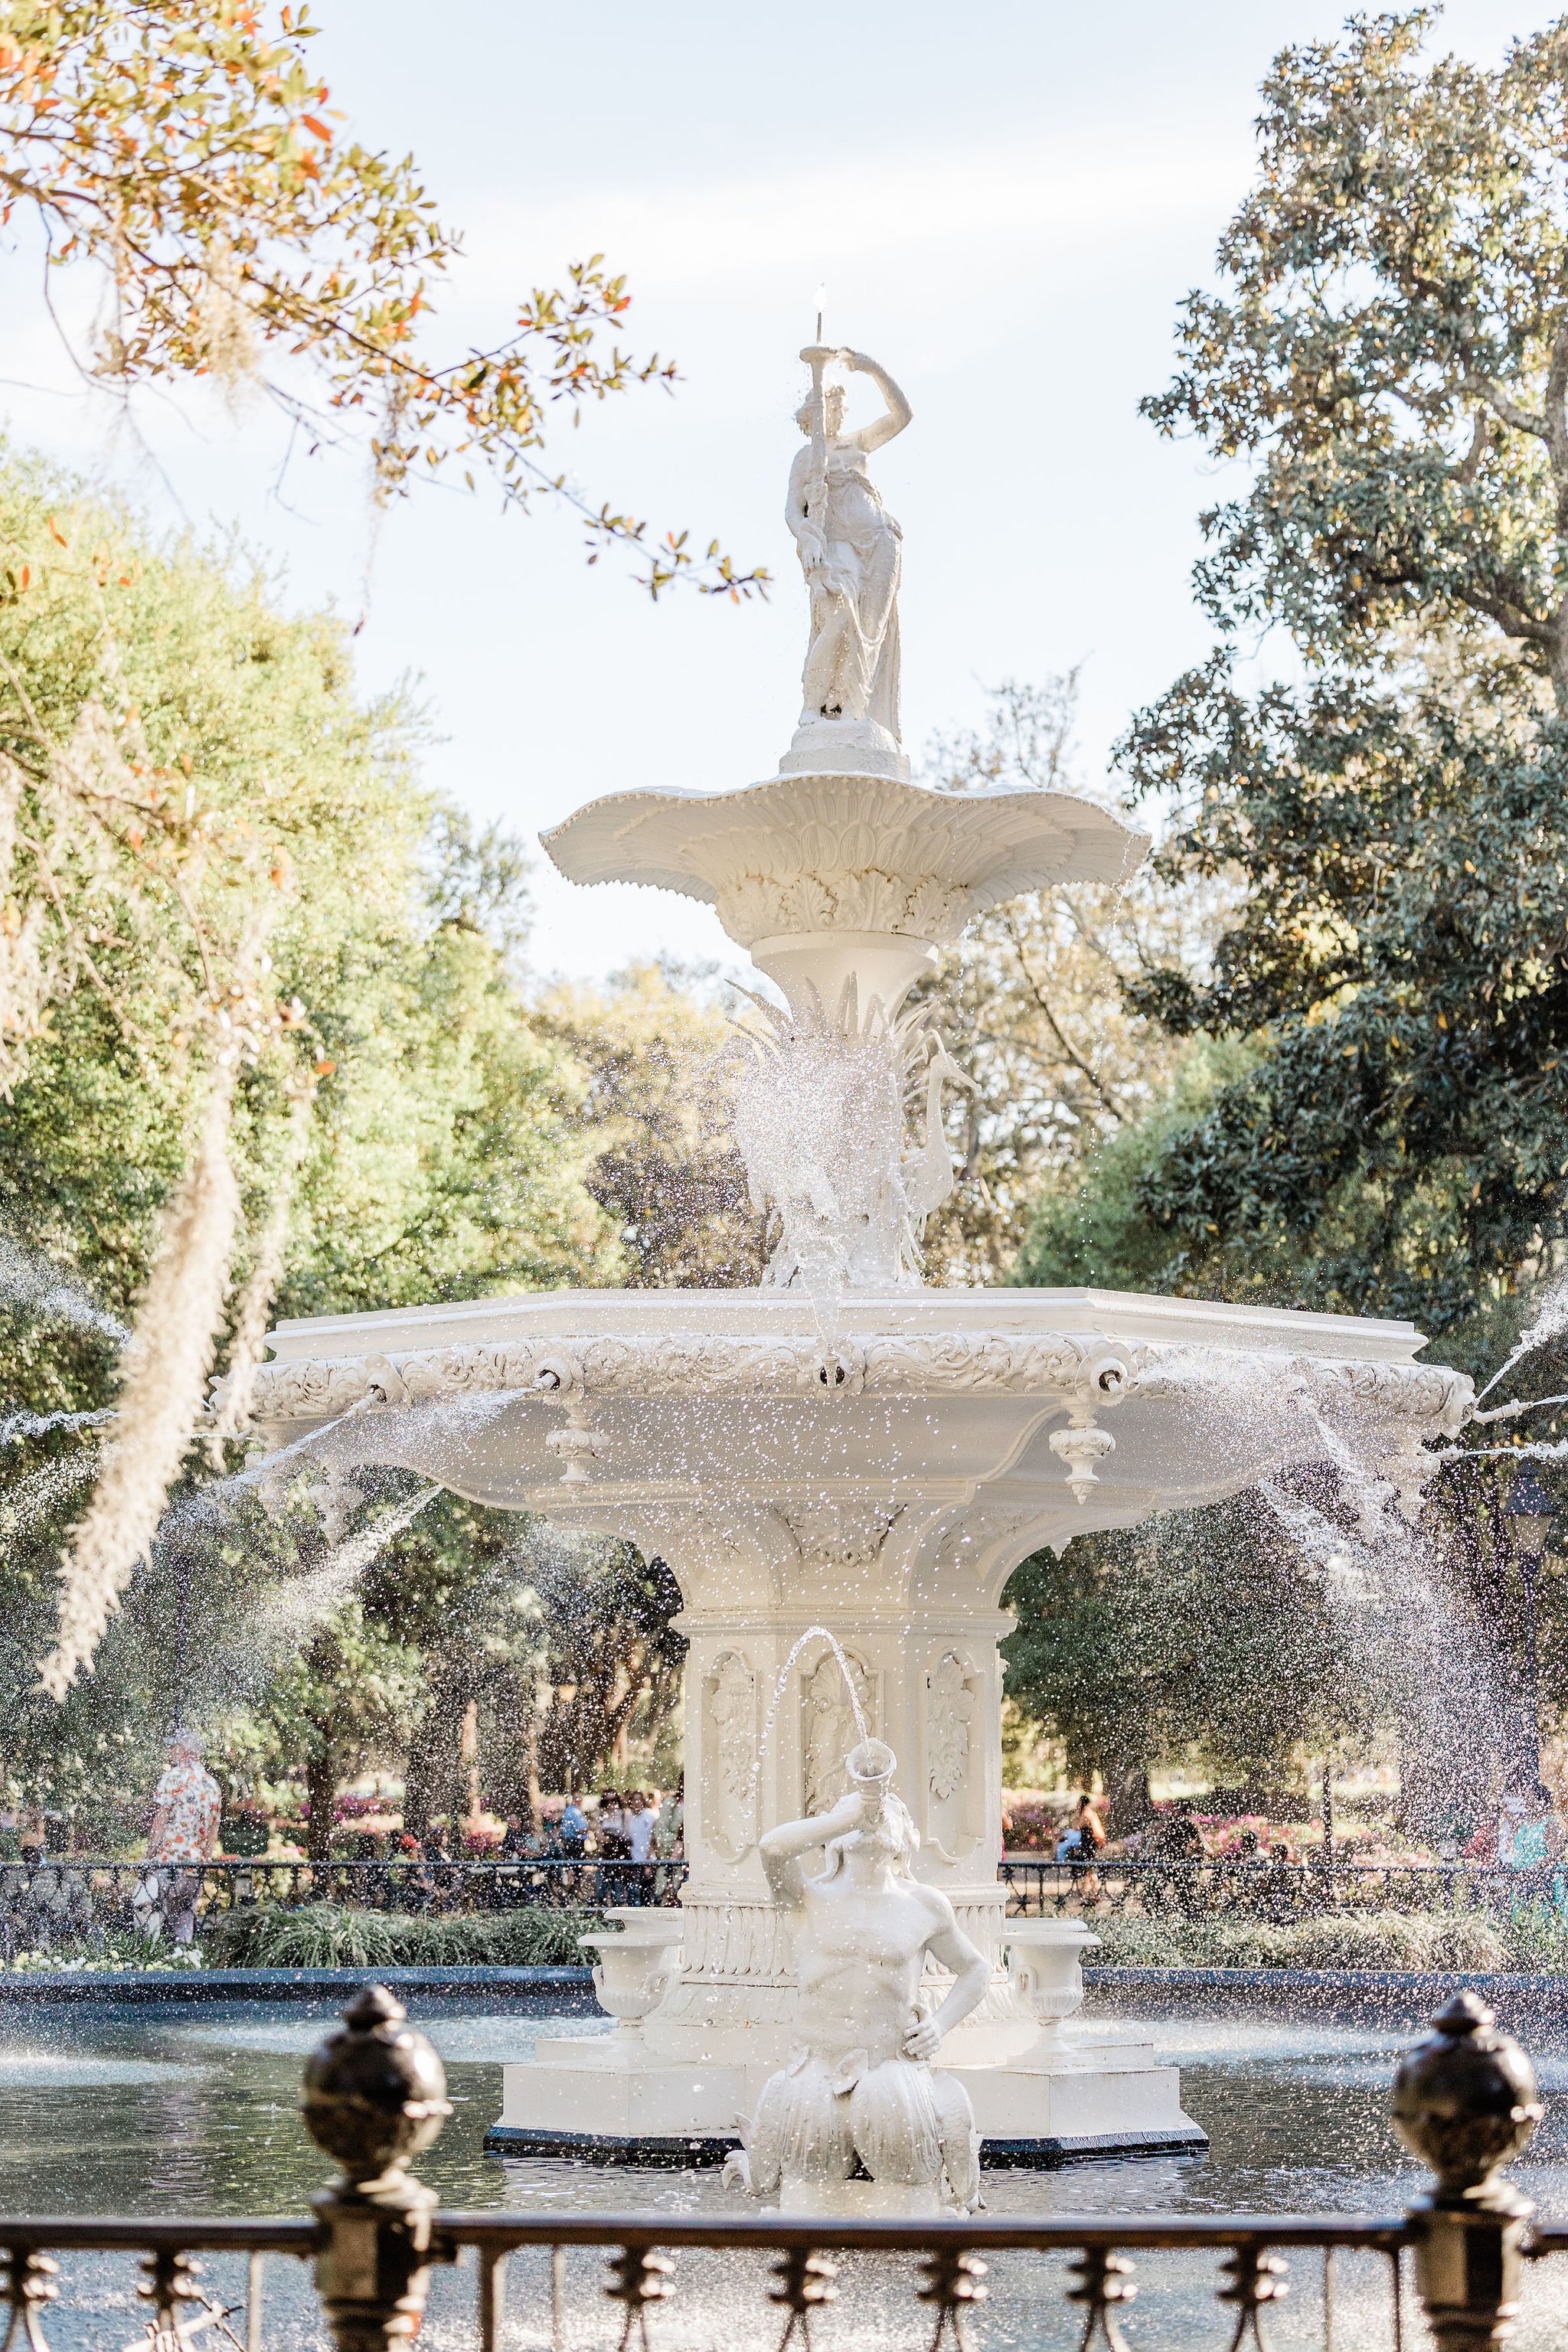 Victoria-and-stuarts-pastel-spring-wedding-at-the-forsyth-park-fountain-and-the-mansion-on-forsyth-in-savannah-georgia-planned-by-savannah-wedding-planner-and-savannah-wedding-florist-ivory-and-beau-7.JPG